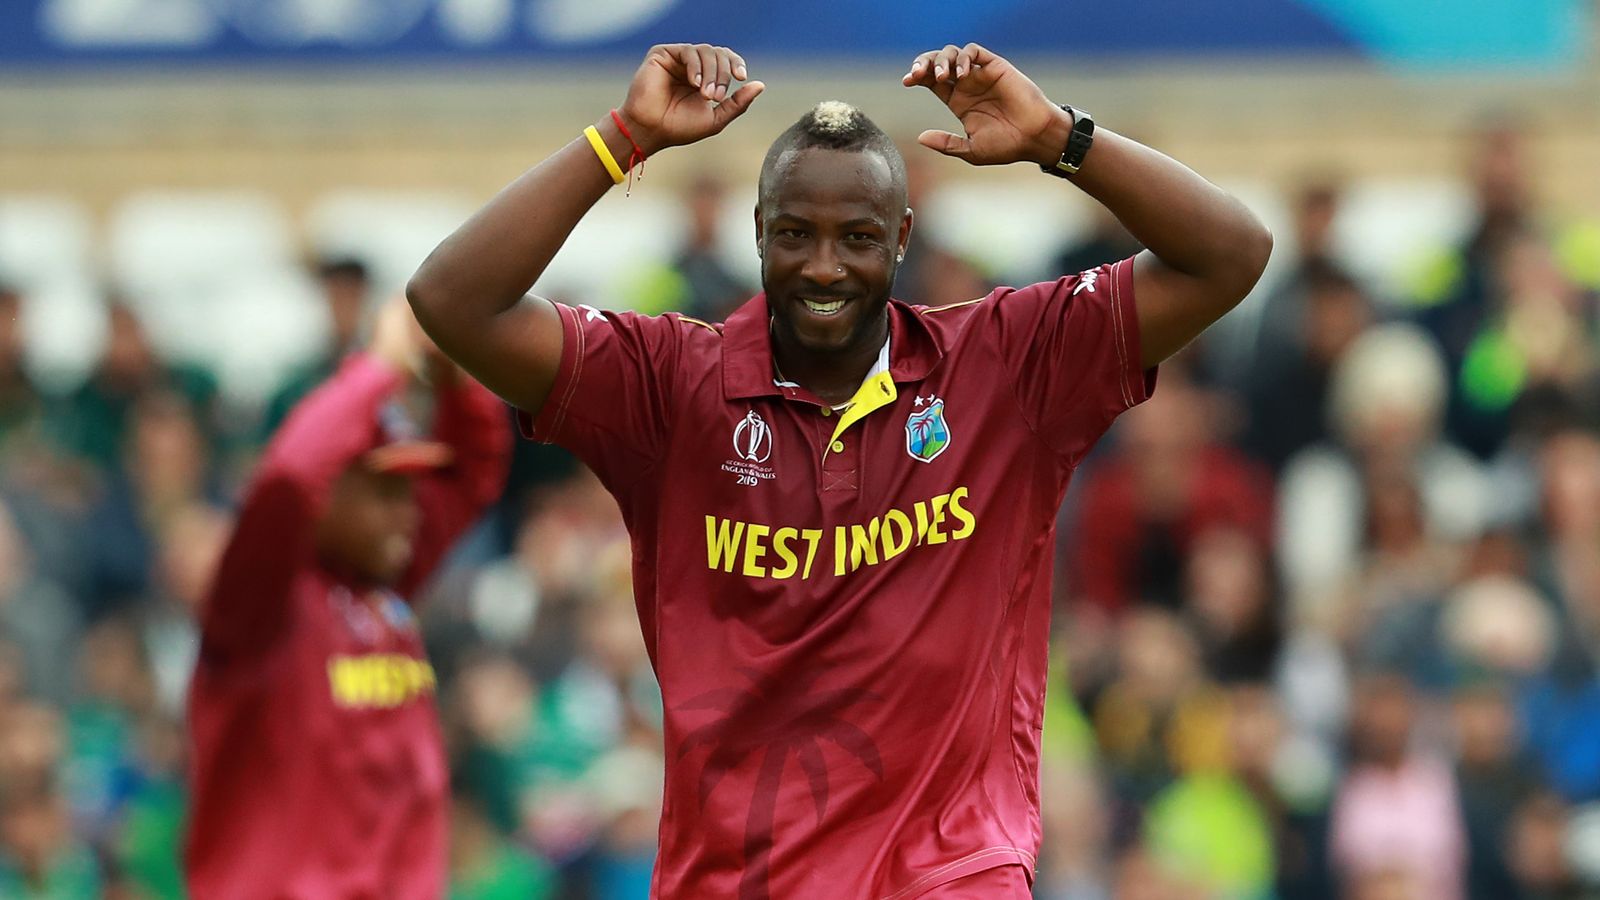 West Indies play Bangladesh in the Cricket World Cup on Monday | Cricket News | Sky Sports1600 x 900